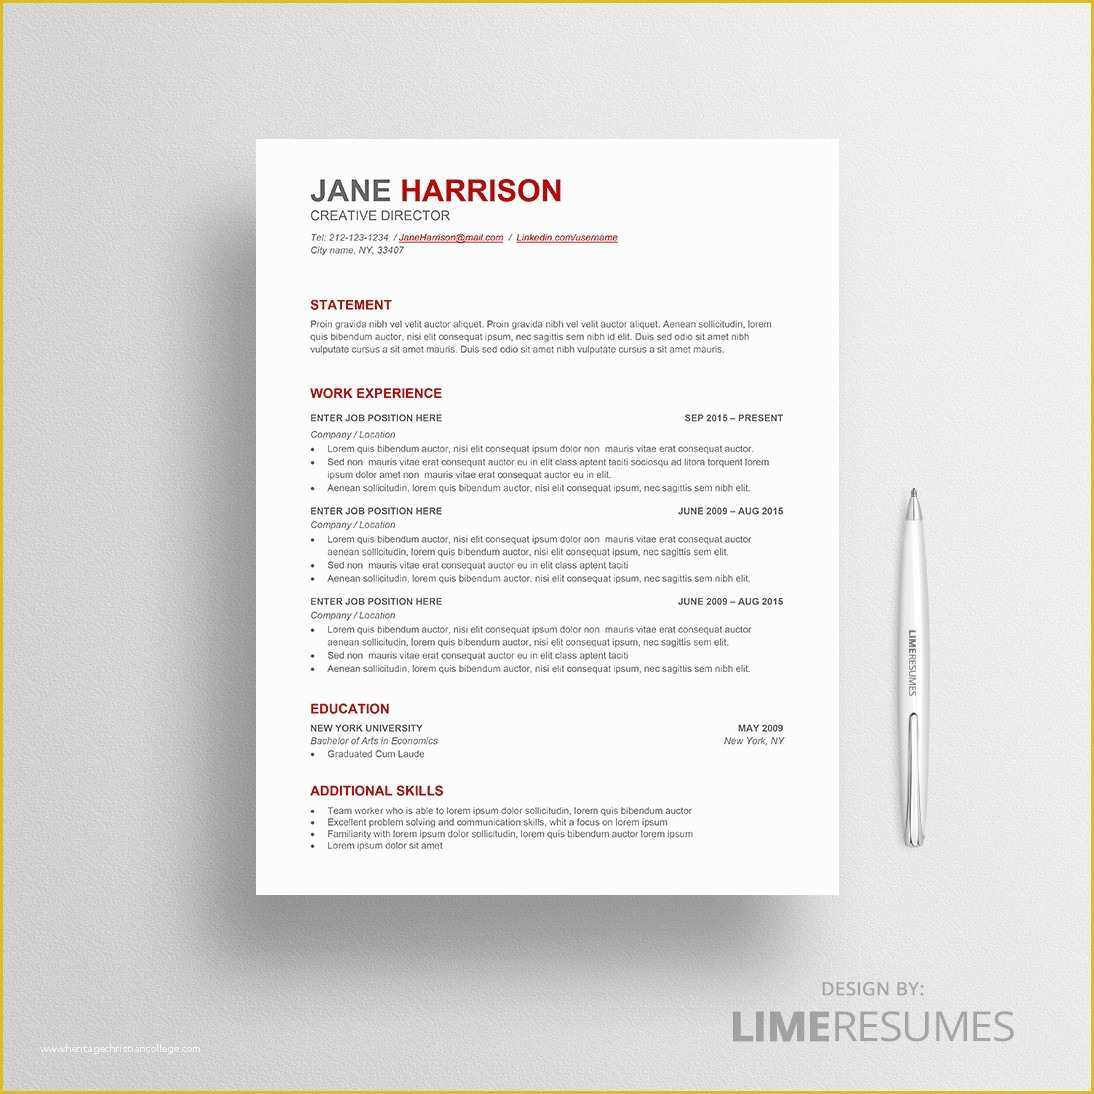 Ats Friendly Resume Template Free Of ats Friendly Resume Template Sample before Page 0 Nrbcfr